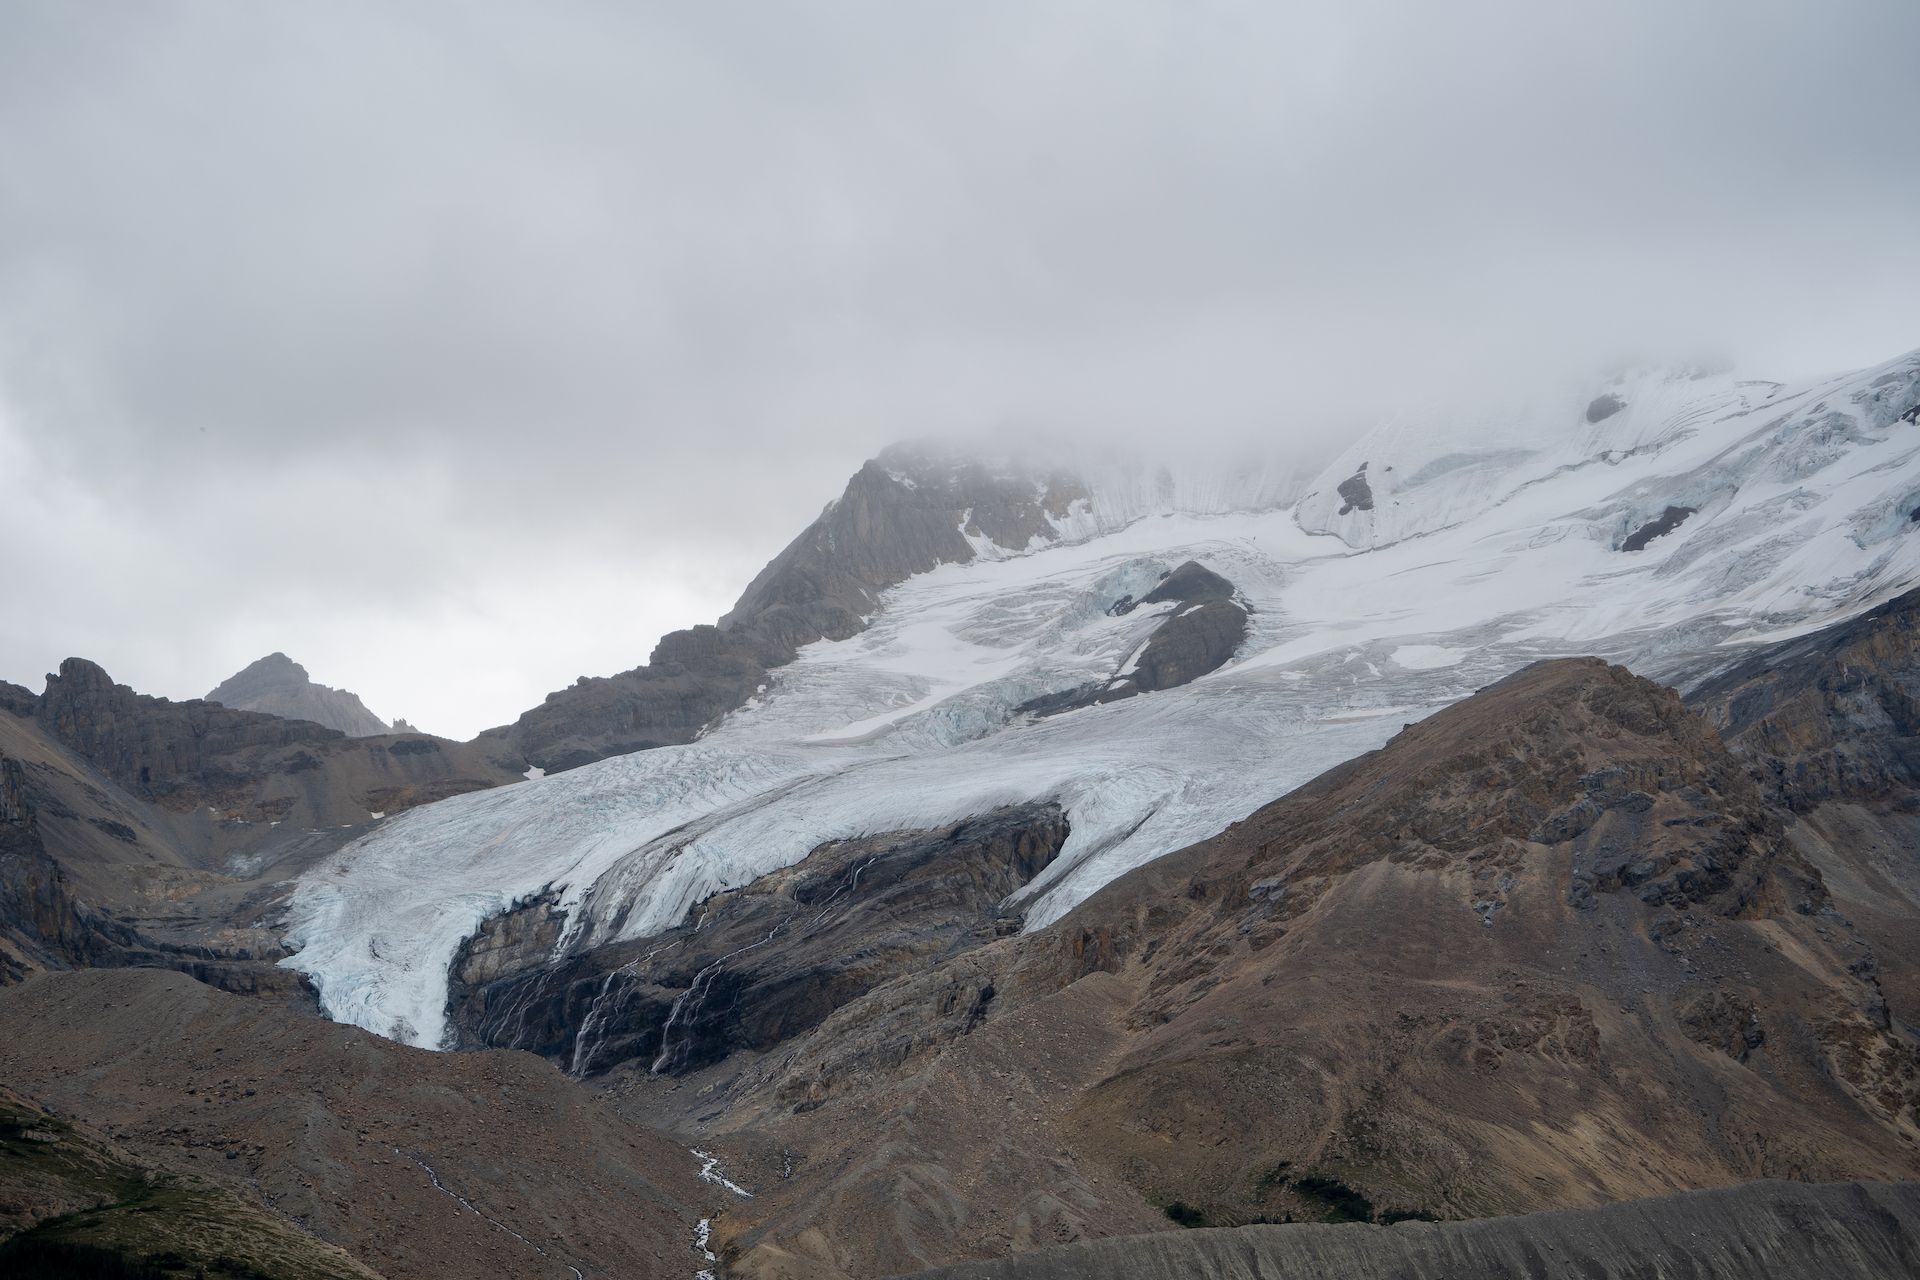 Even though we lost count of how many glaciers we saw this summer, it’s always a happy sight!